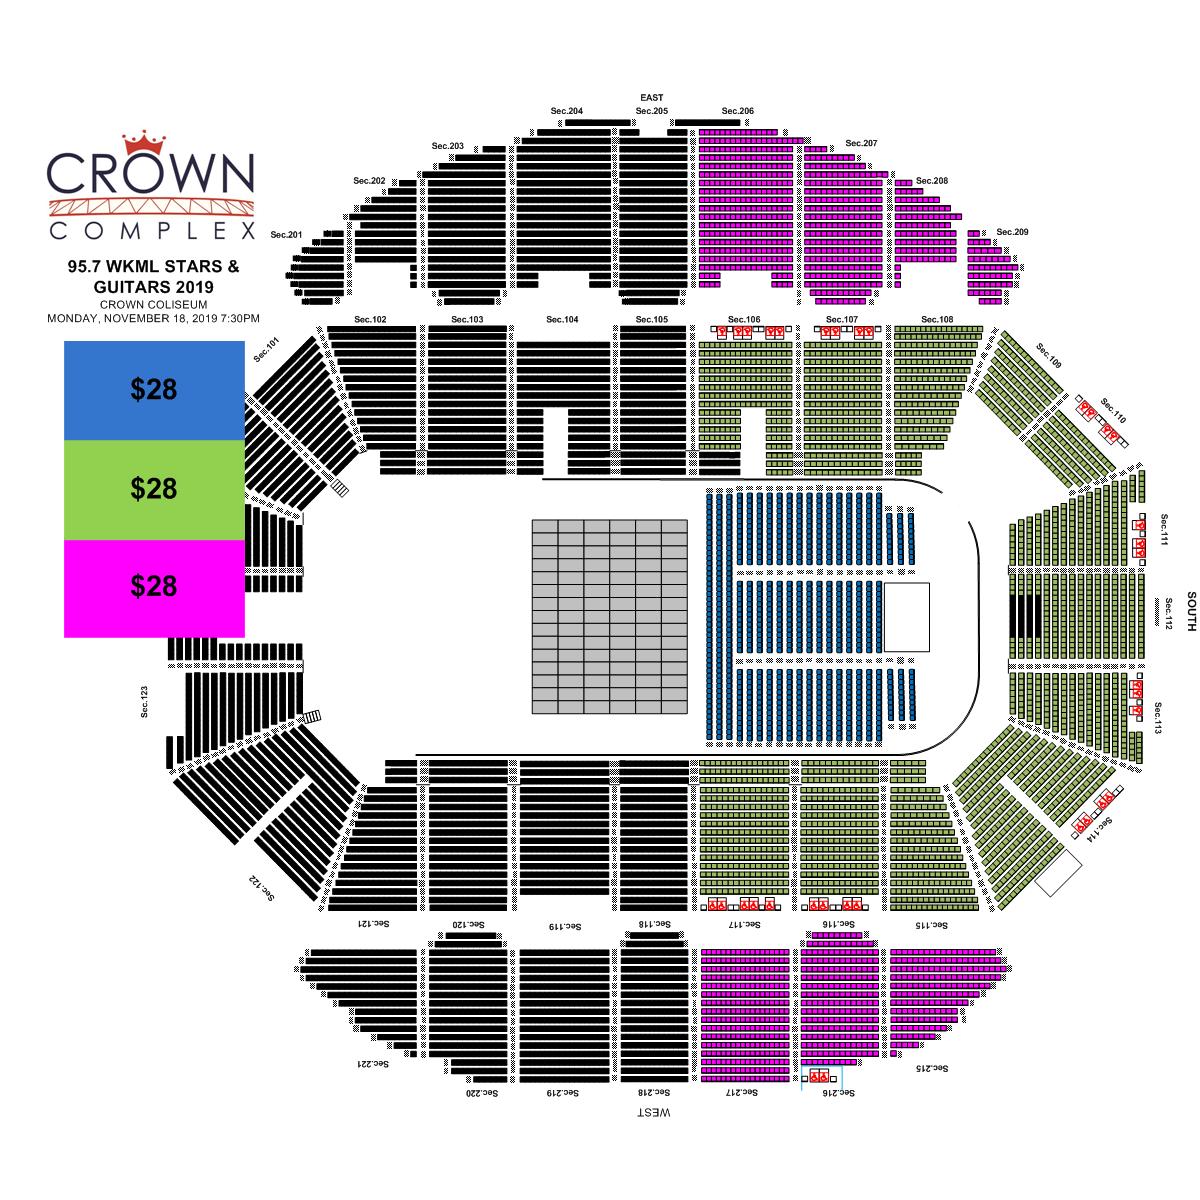 Crown Center Of Cumberland County Seating Chart